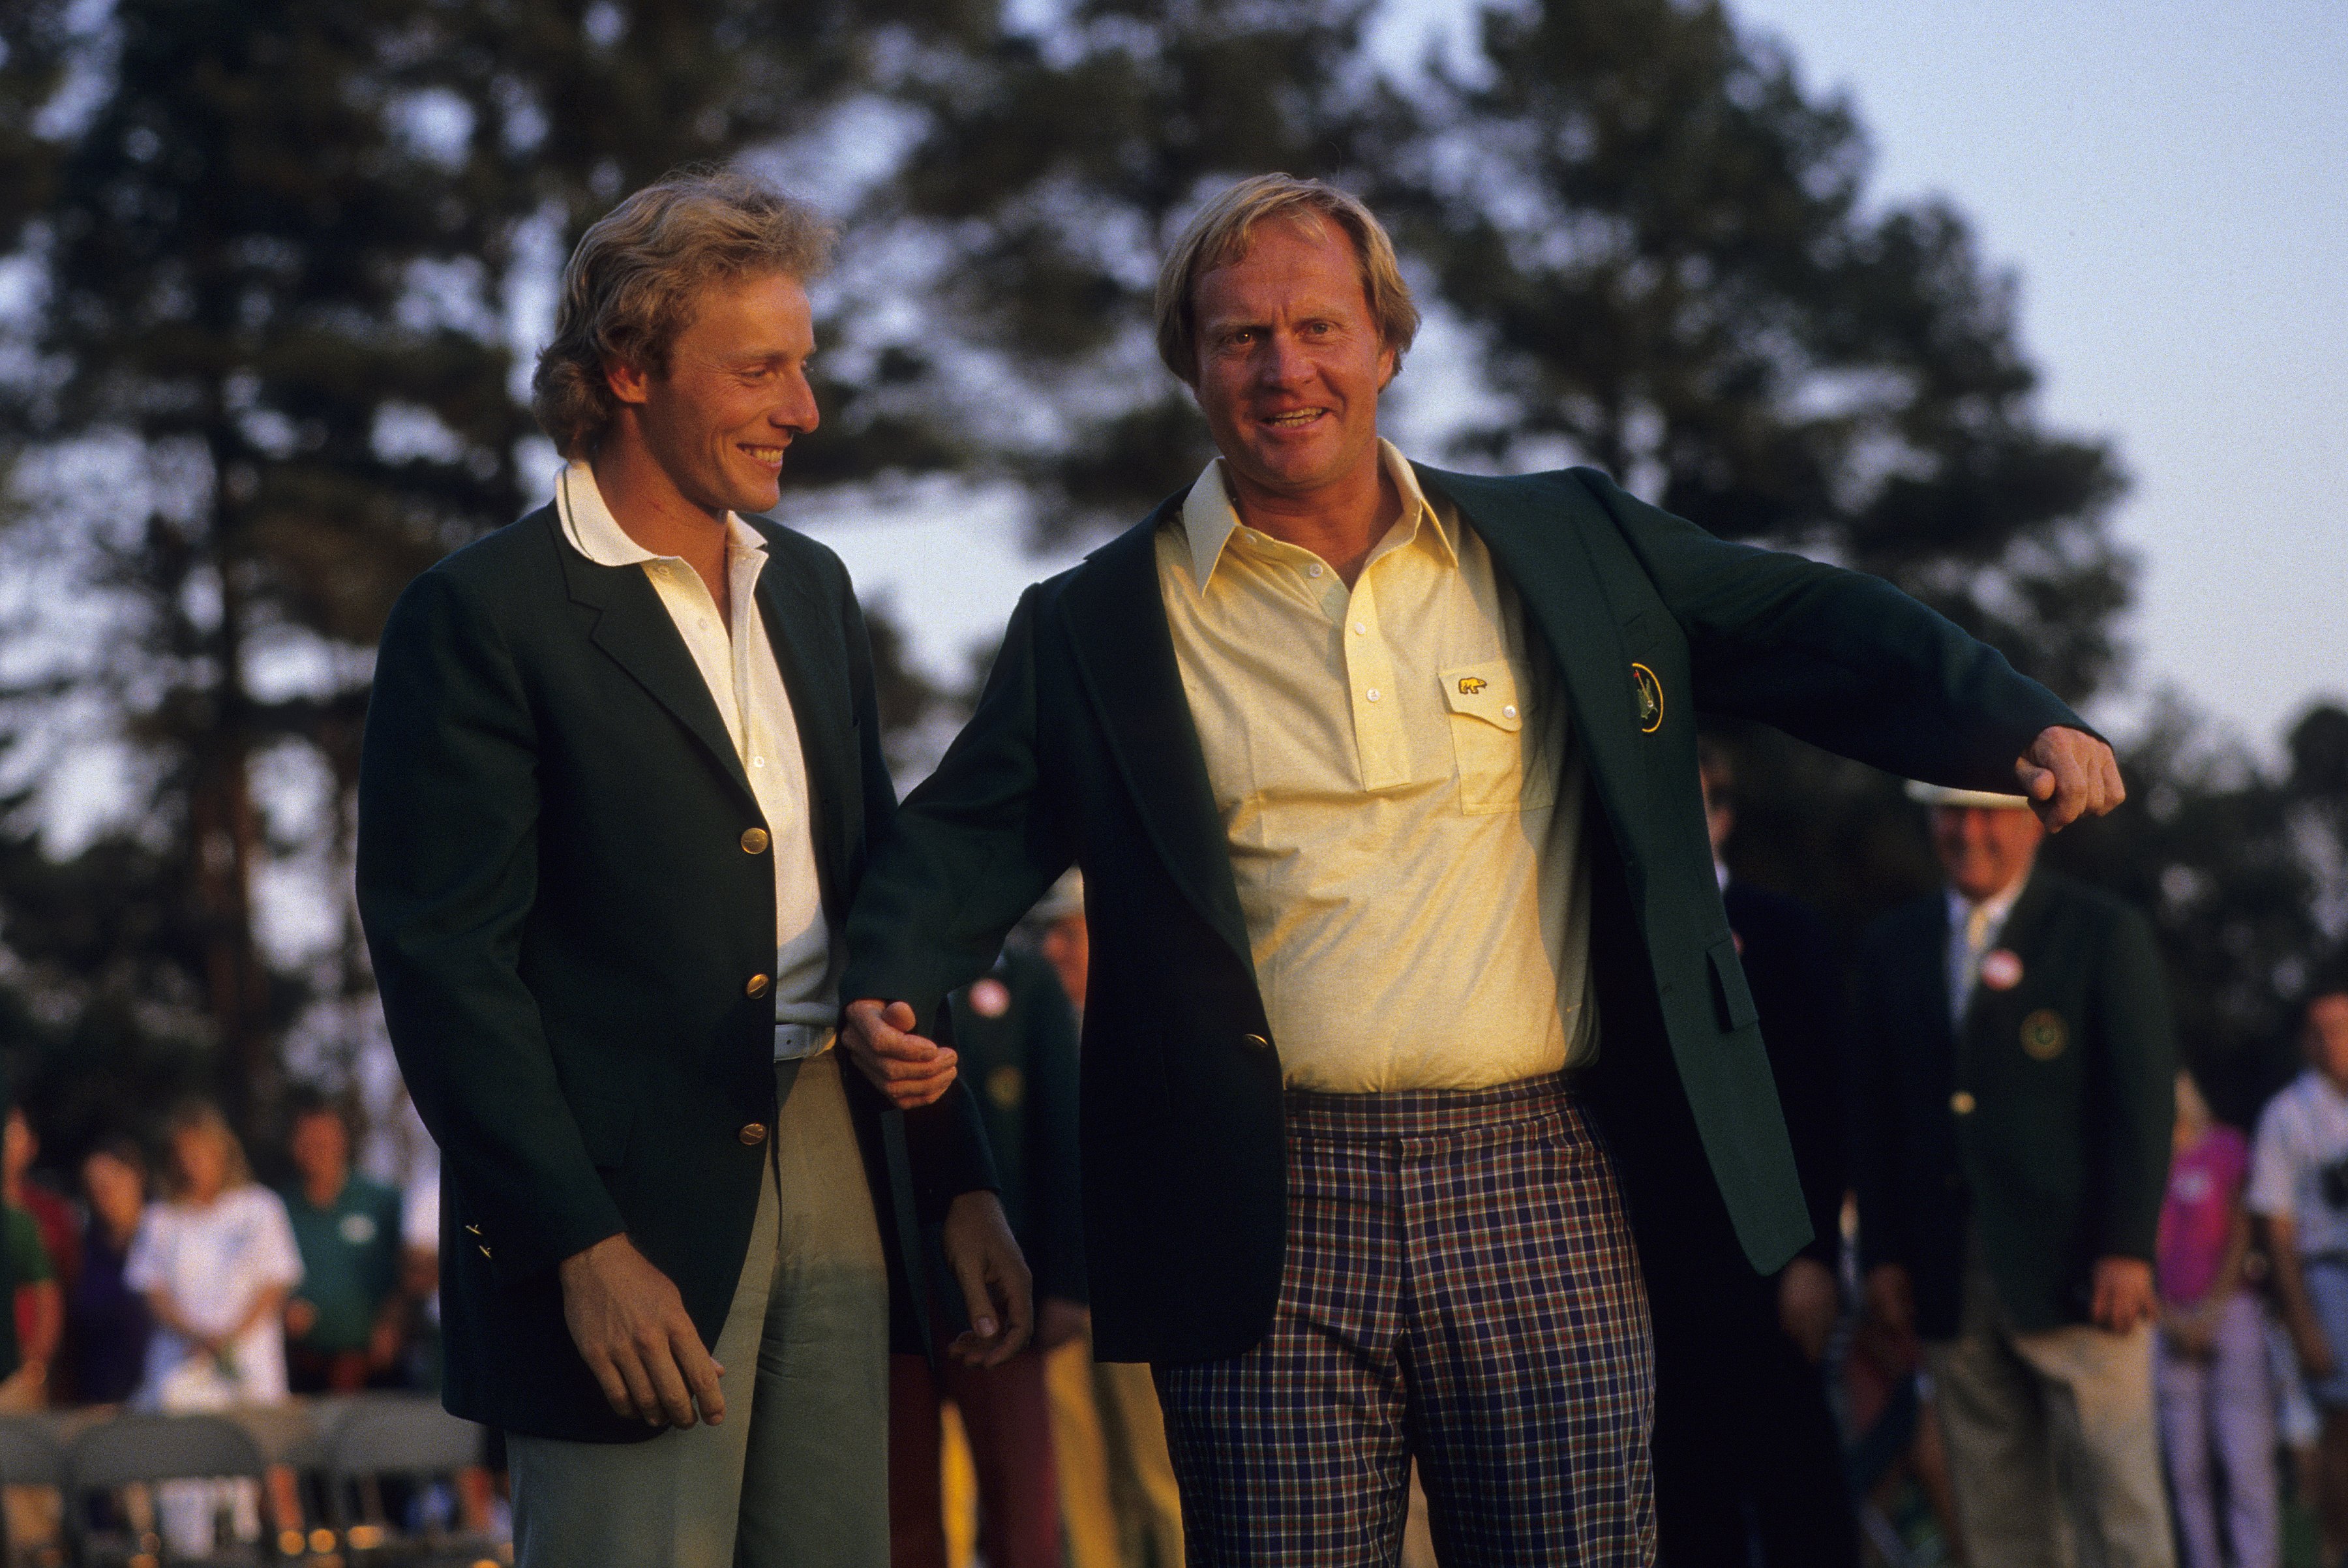 are masters champions exempt for life?